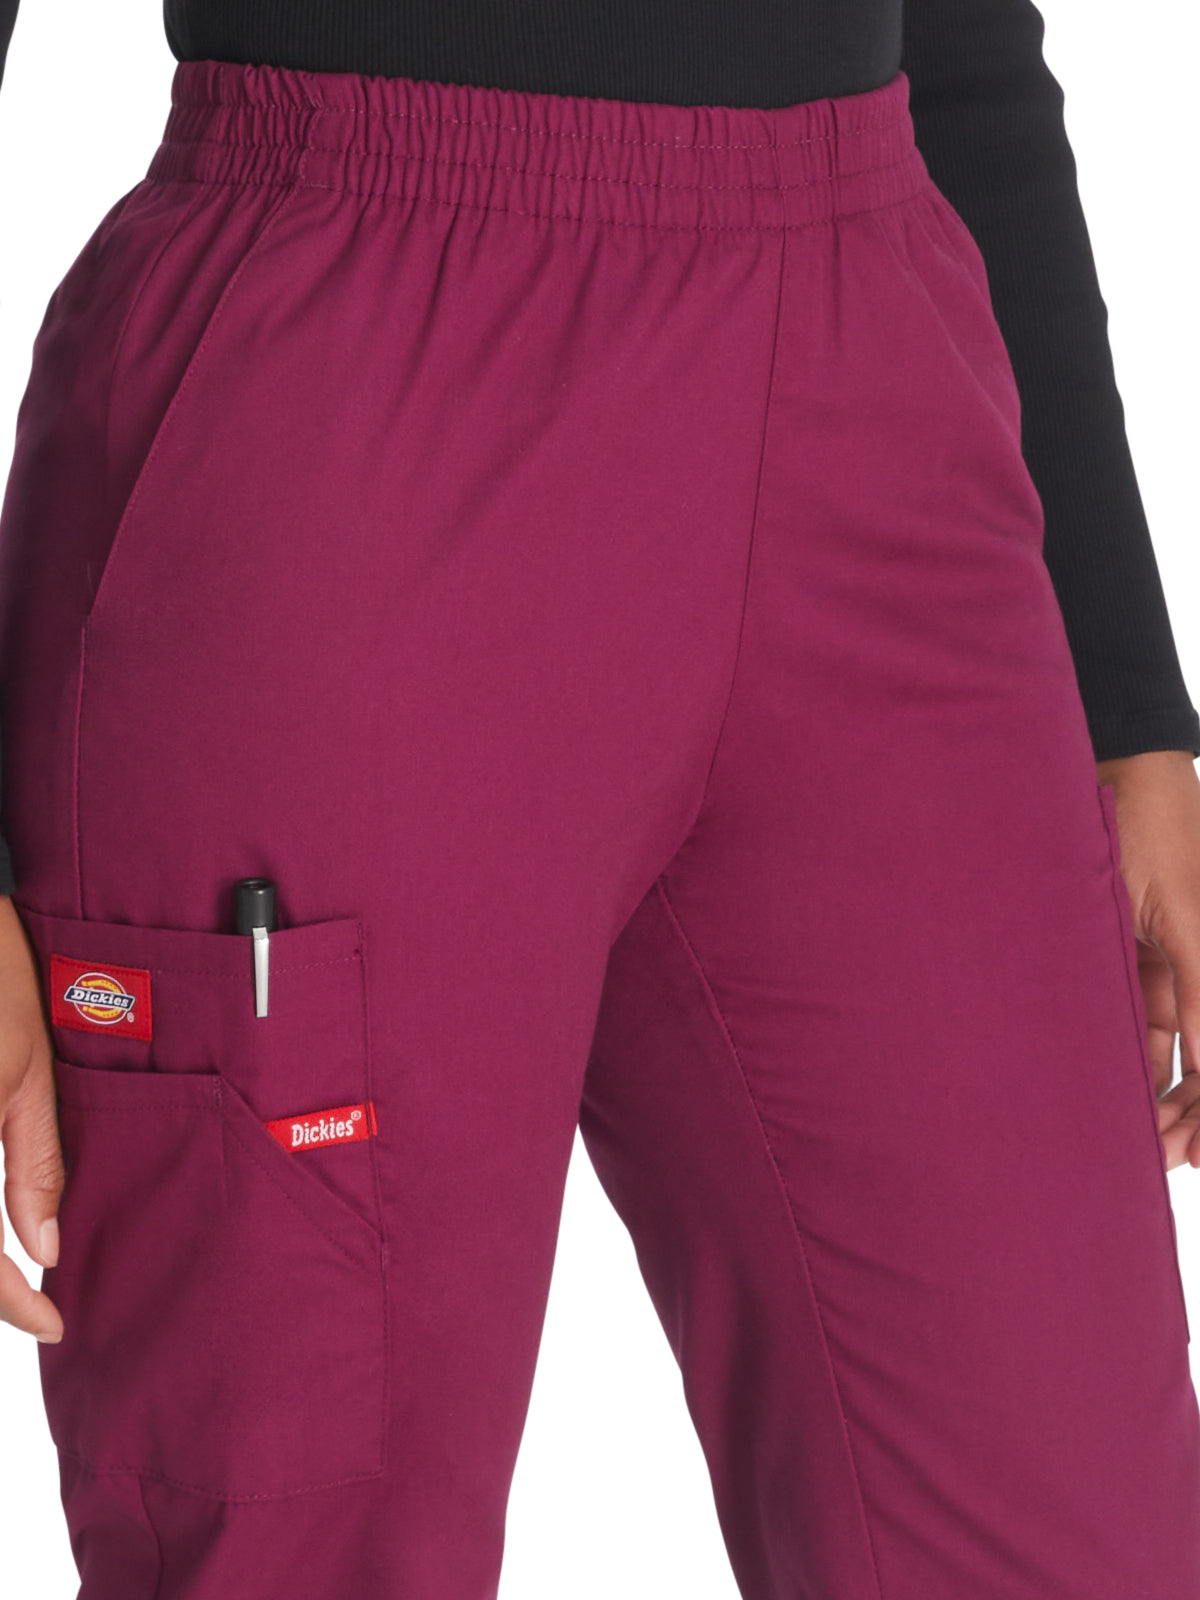 Women's Natural Rise Tapered Leg Pull-On Pant